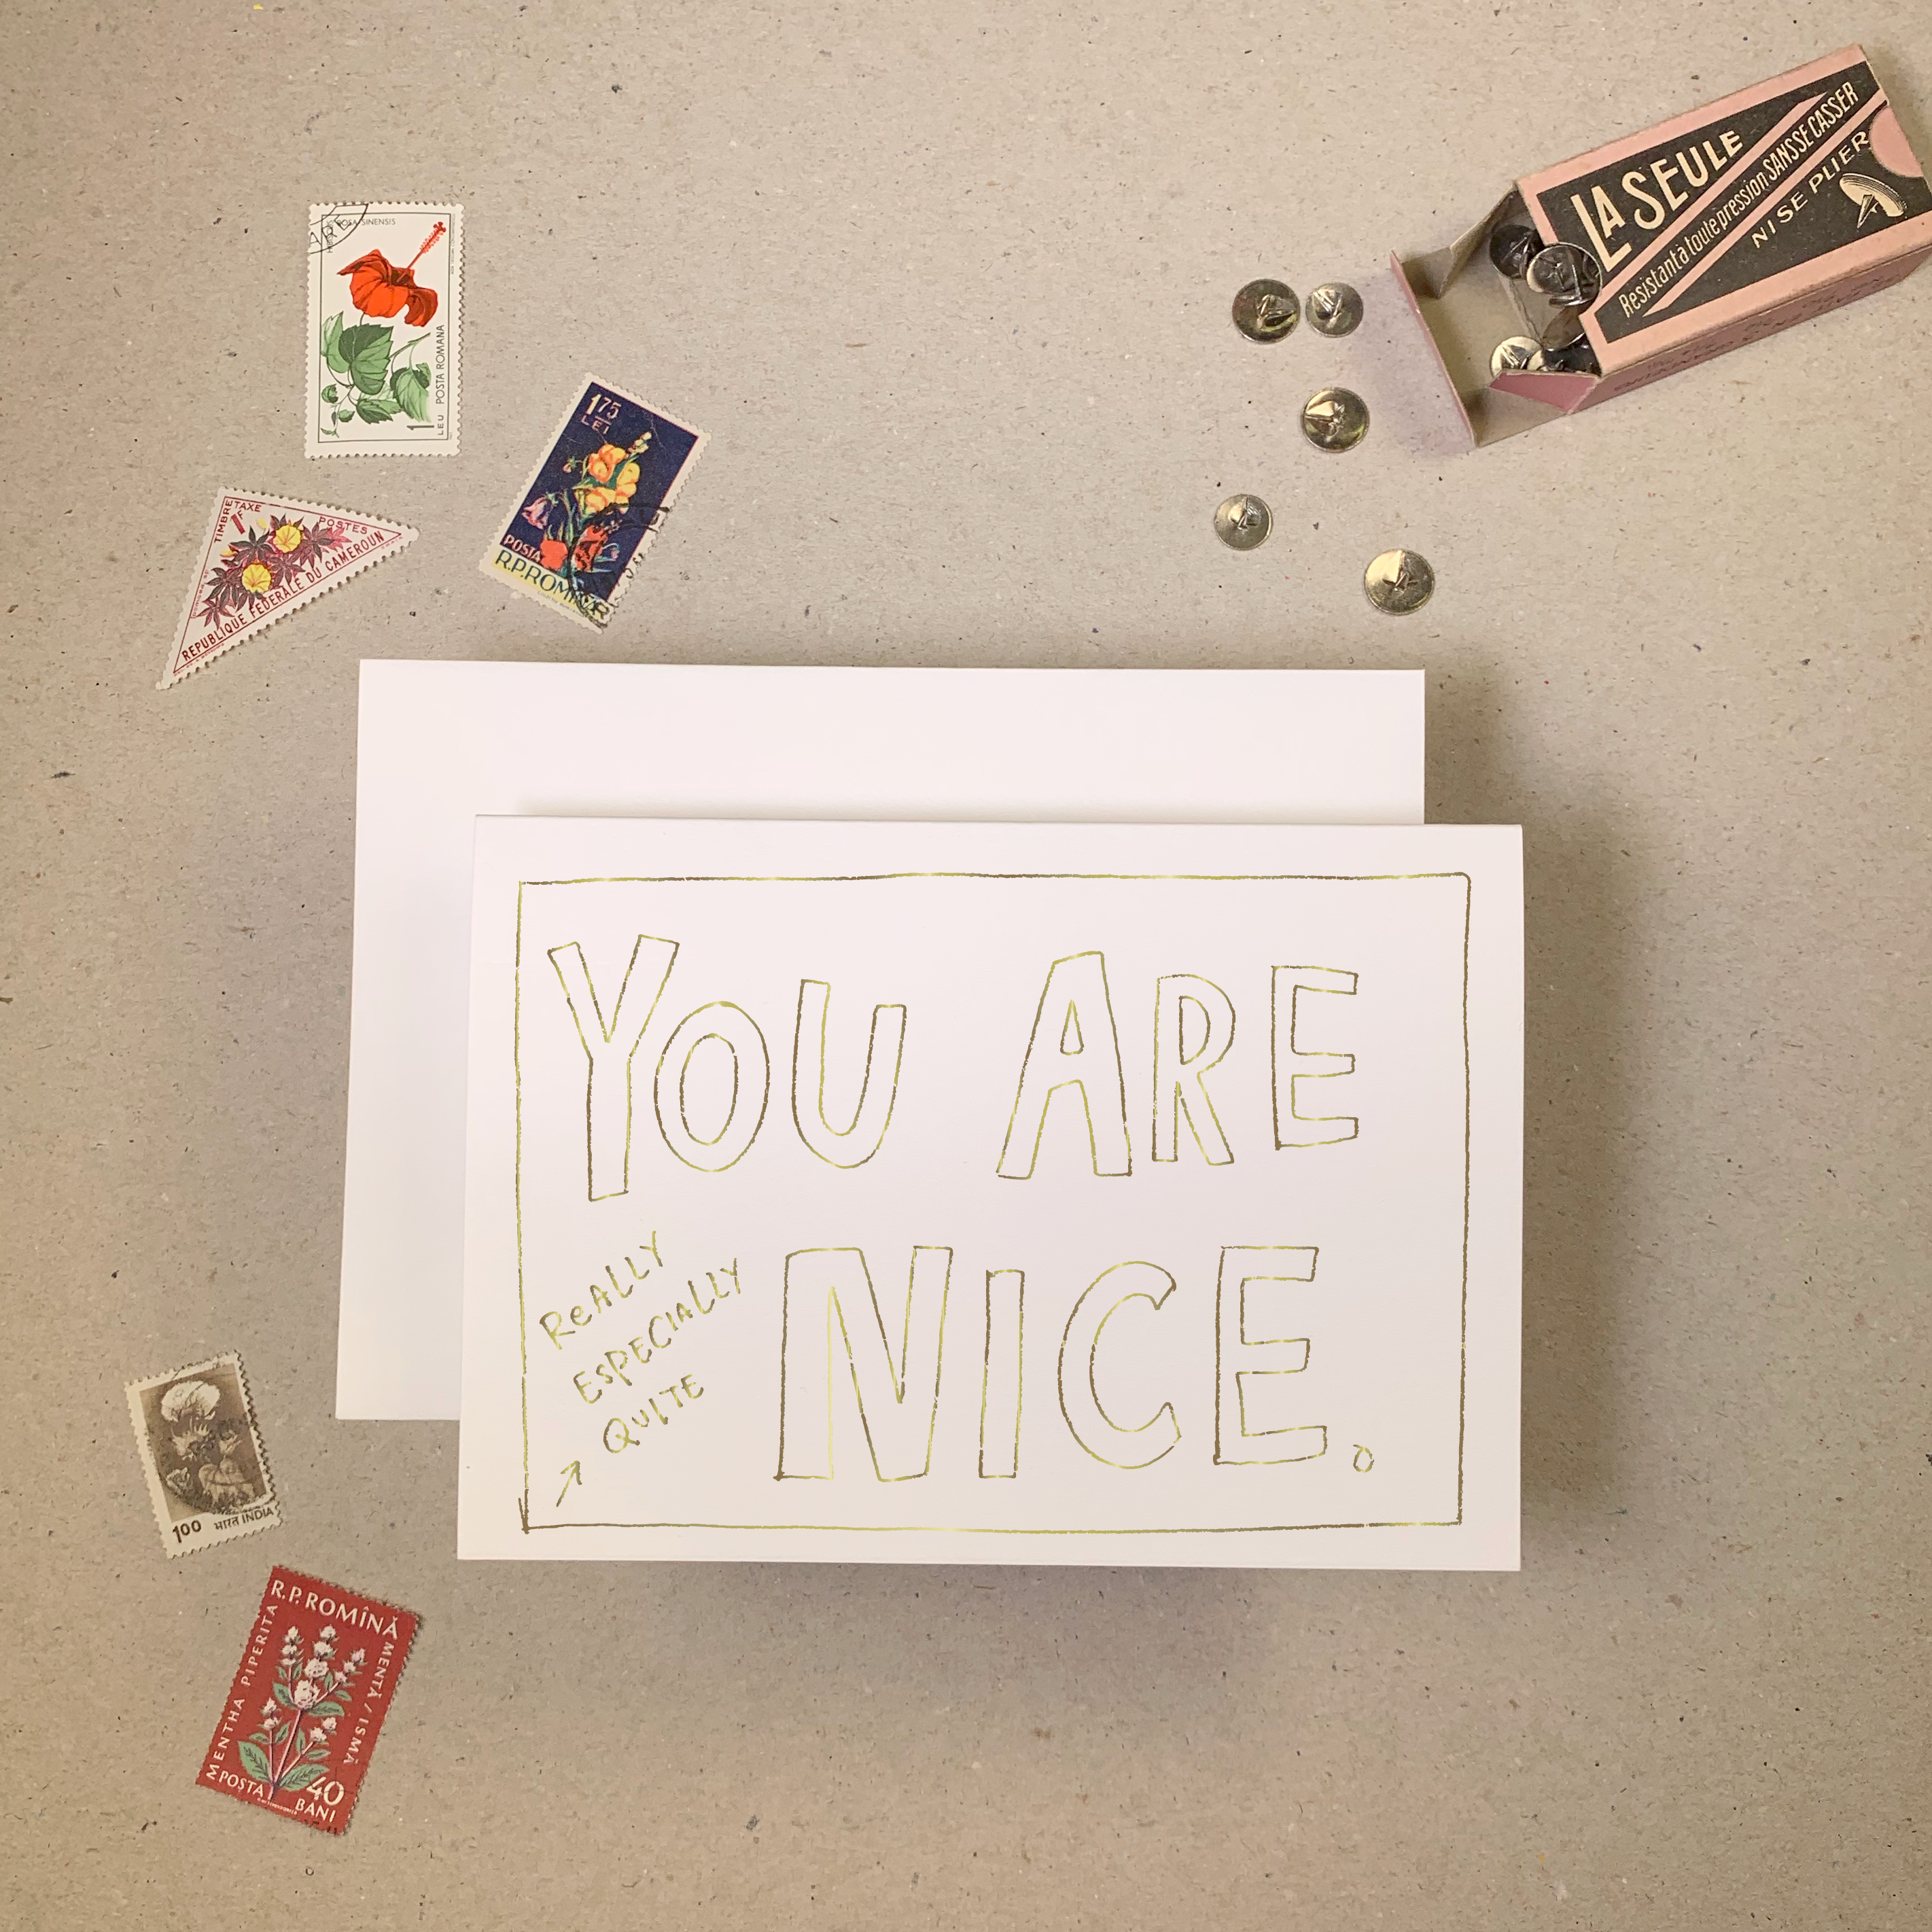 YOU ARE 'really especially quite' NICE Greetings Card